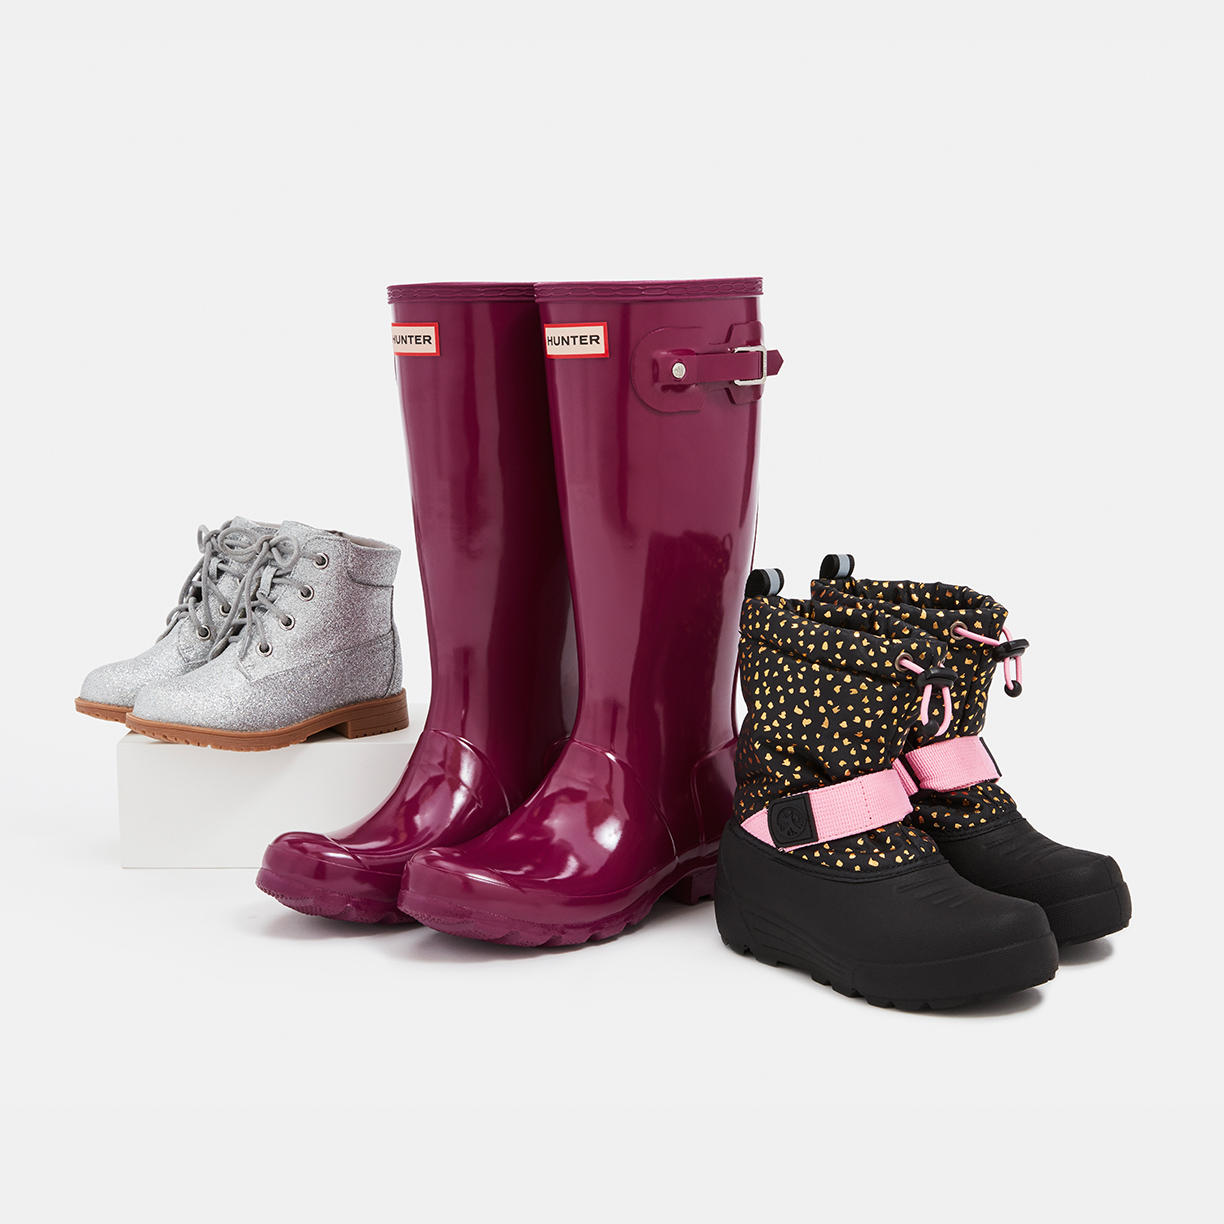 Kids' Winter Boot Preview from $25